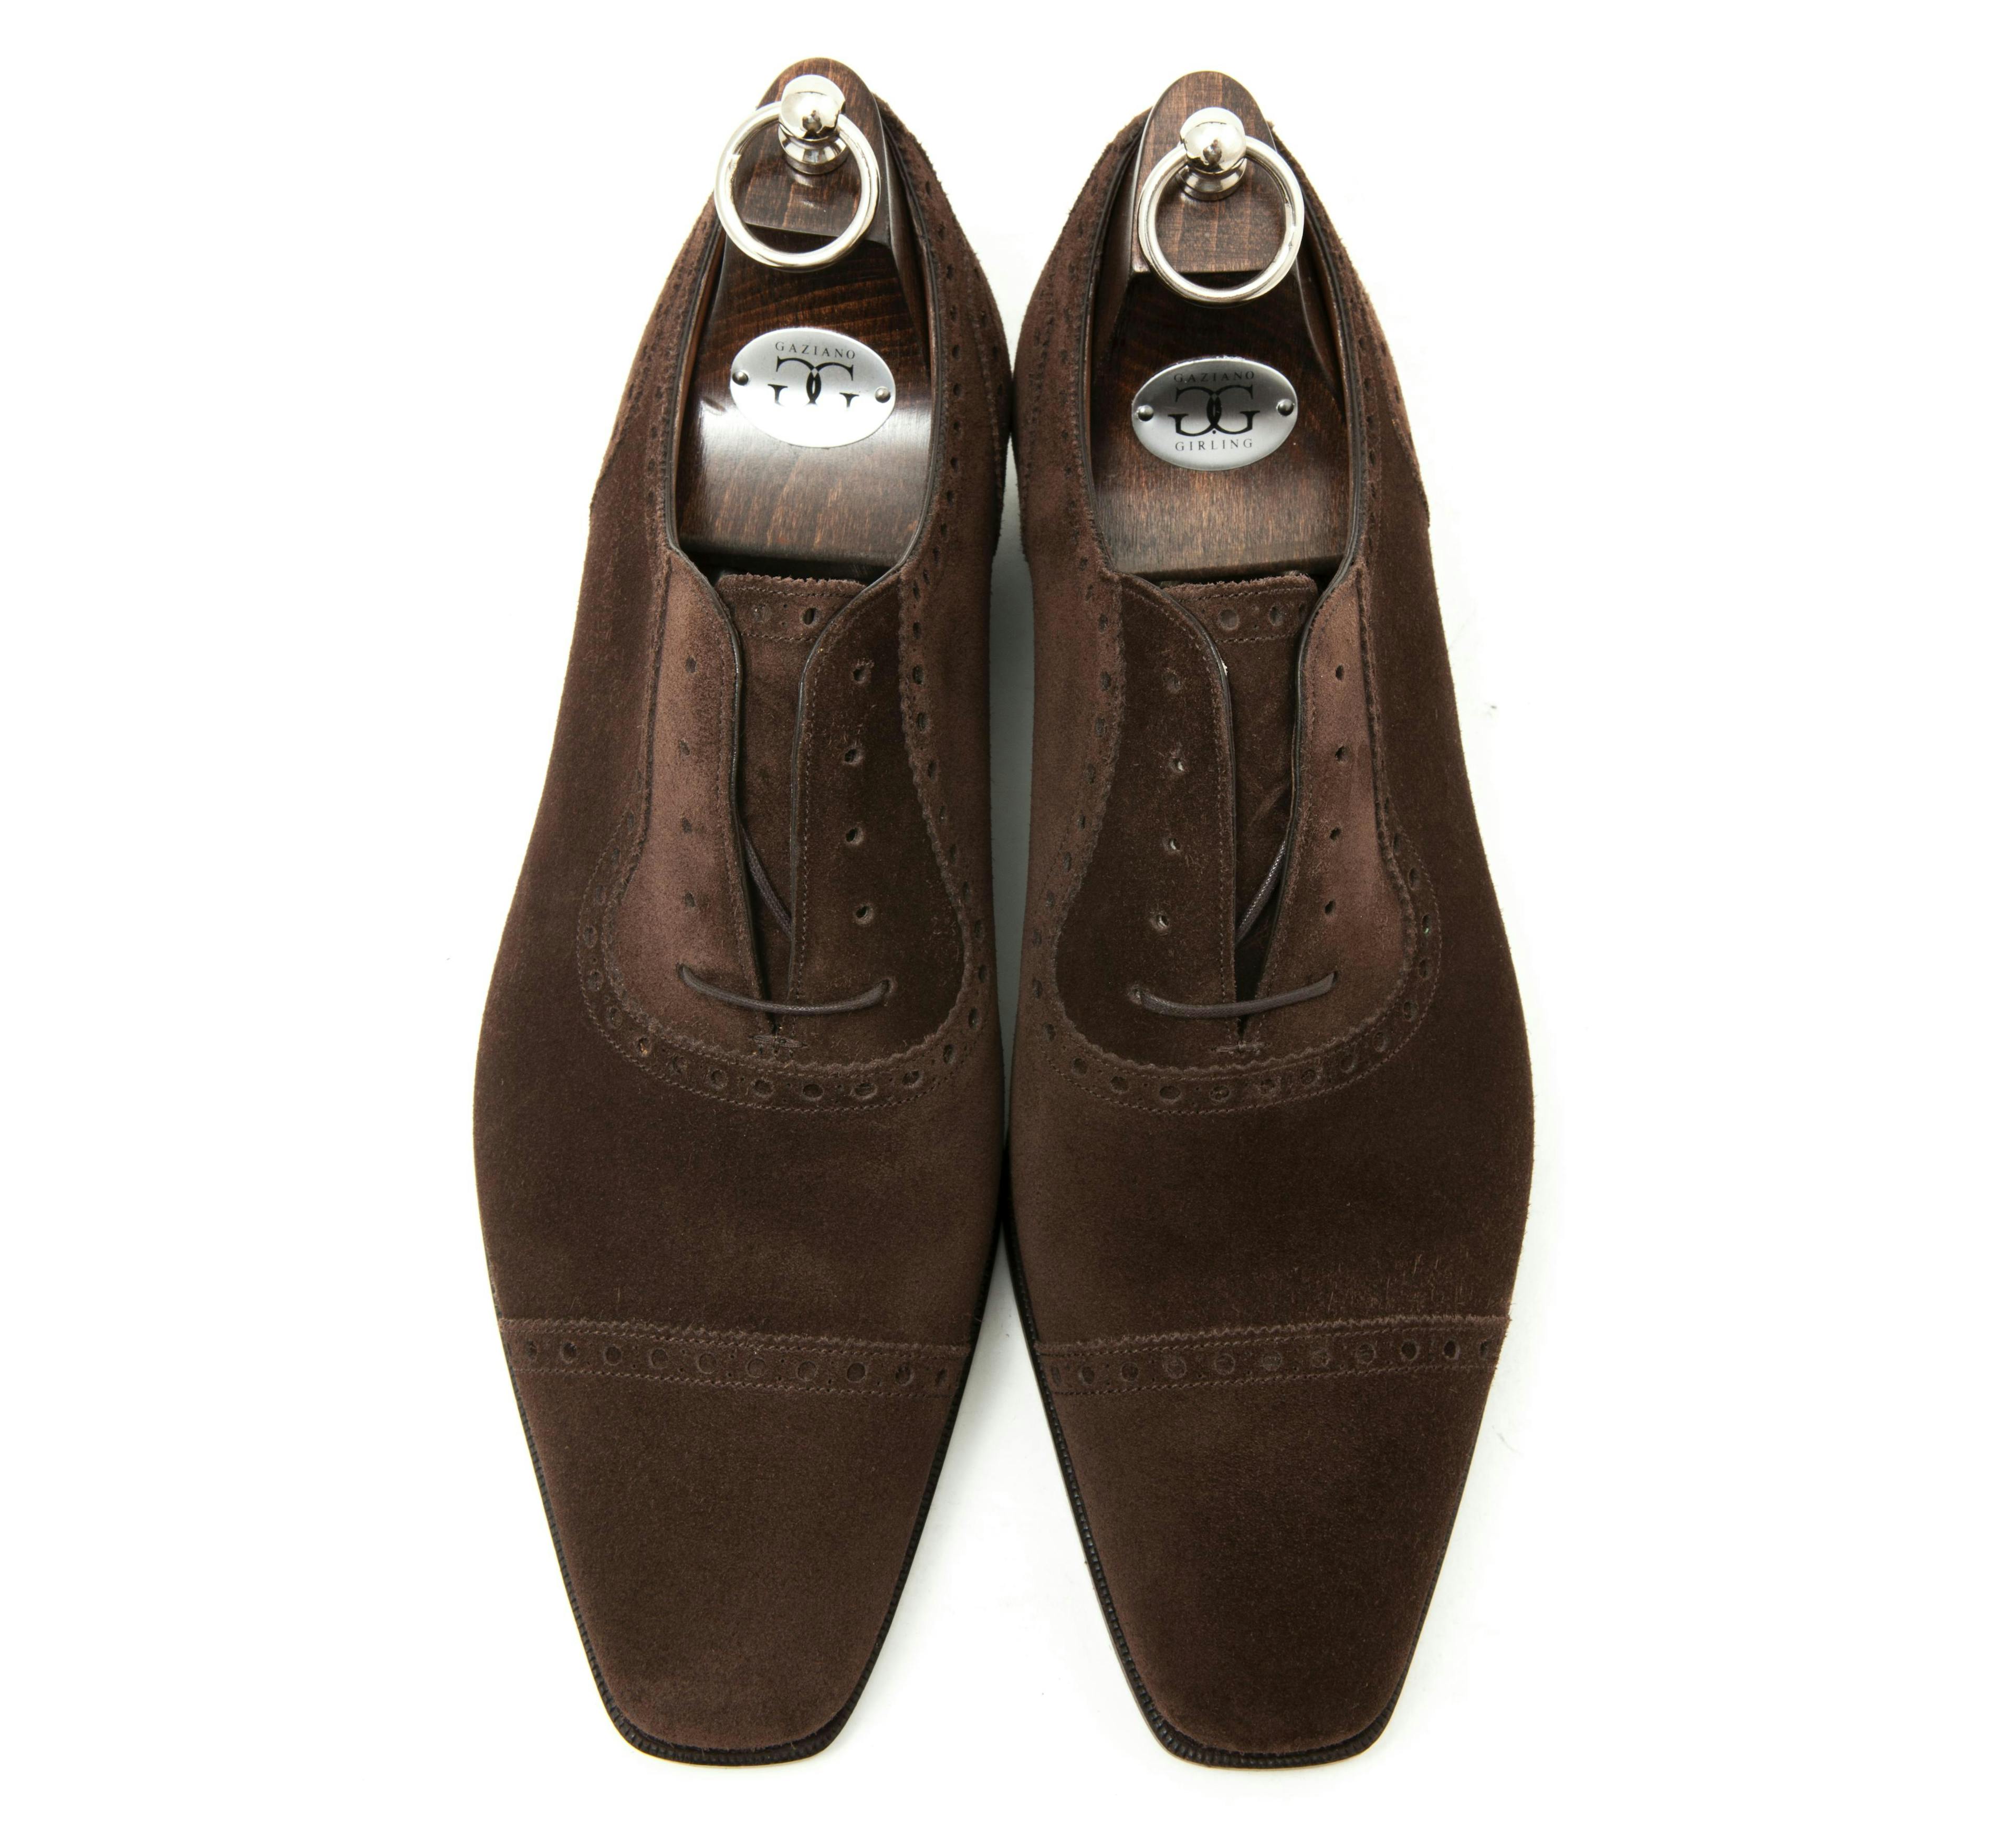 Top view of a Gaziano & Girling St. James in mole suede.